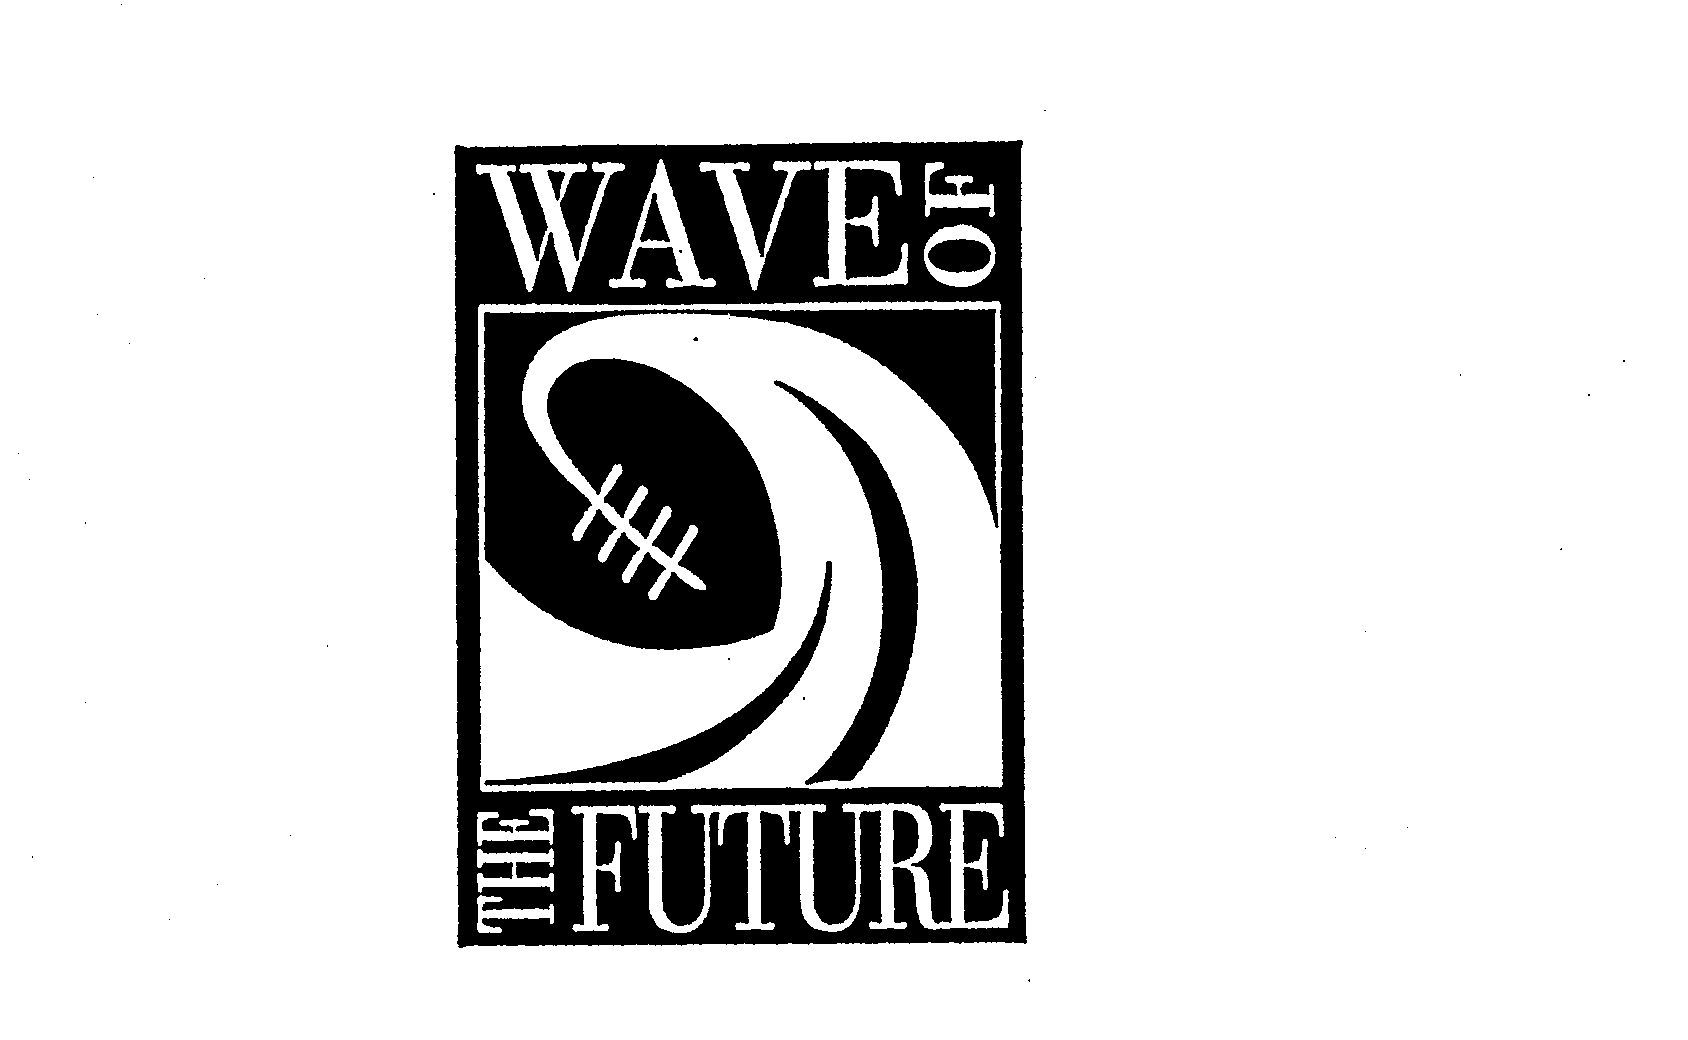  WAVE OF THE FUTURE